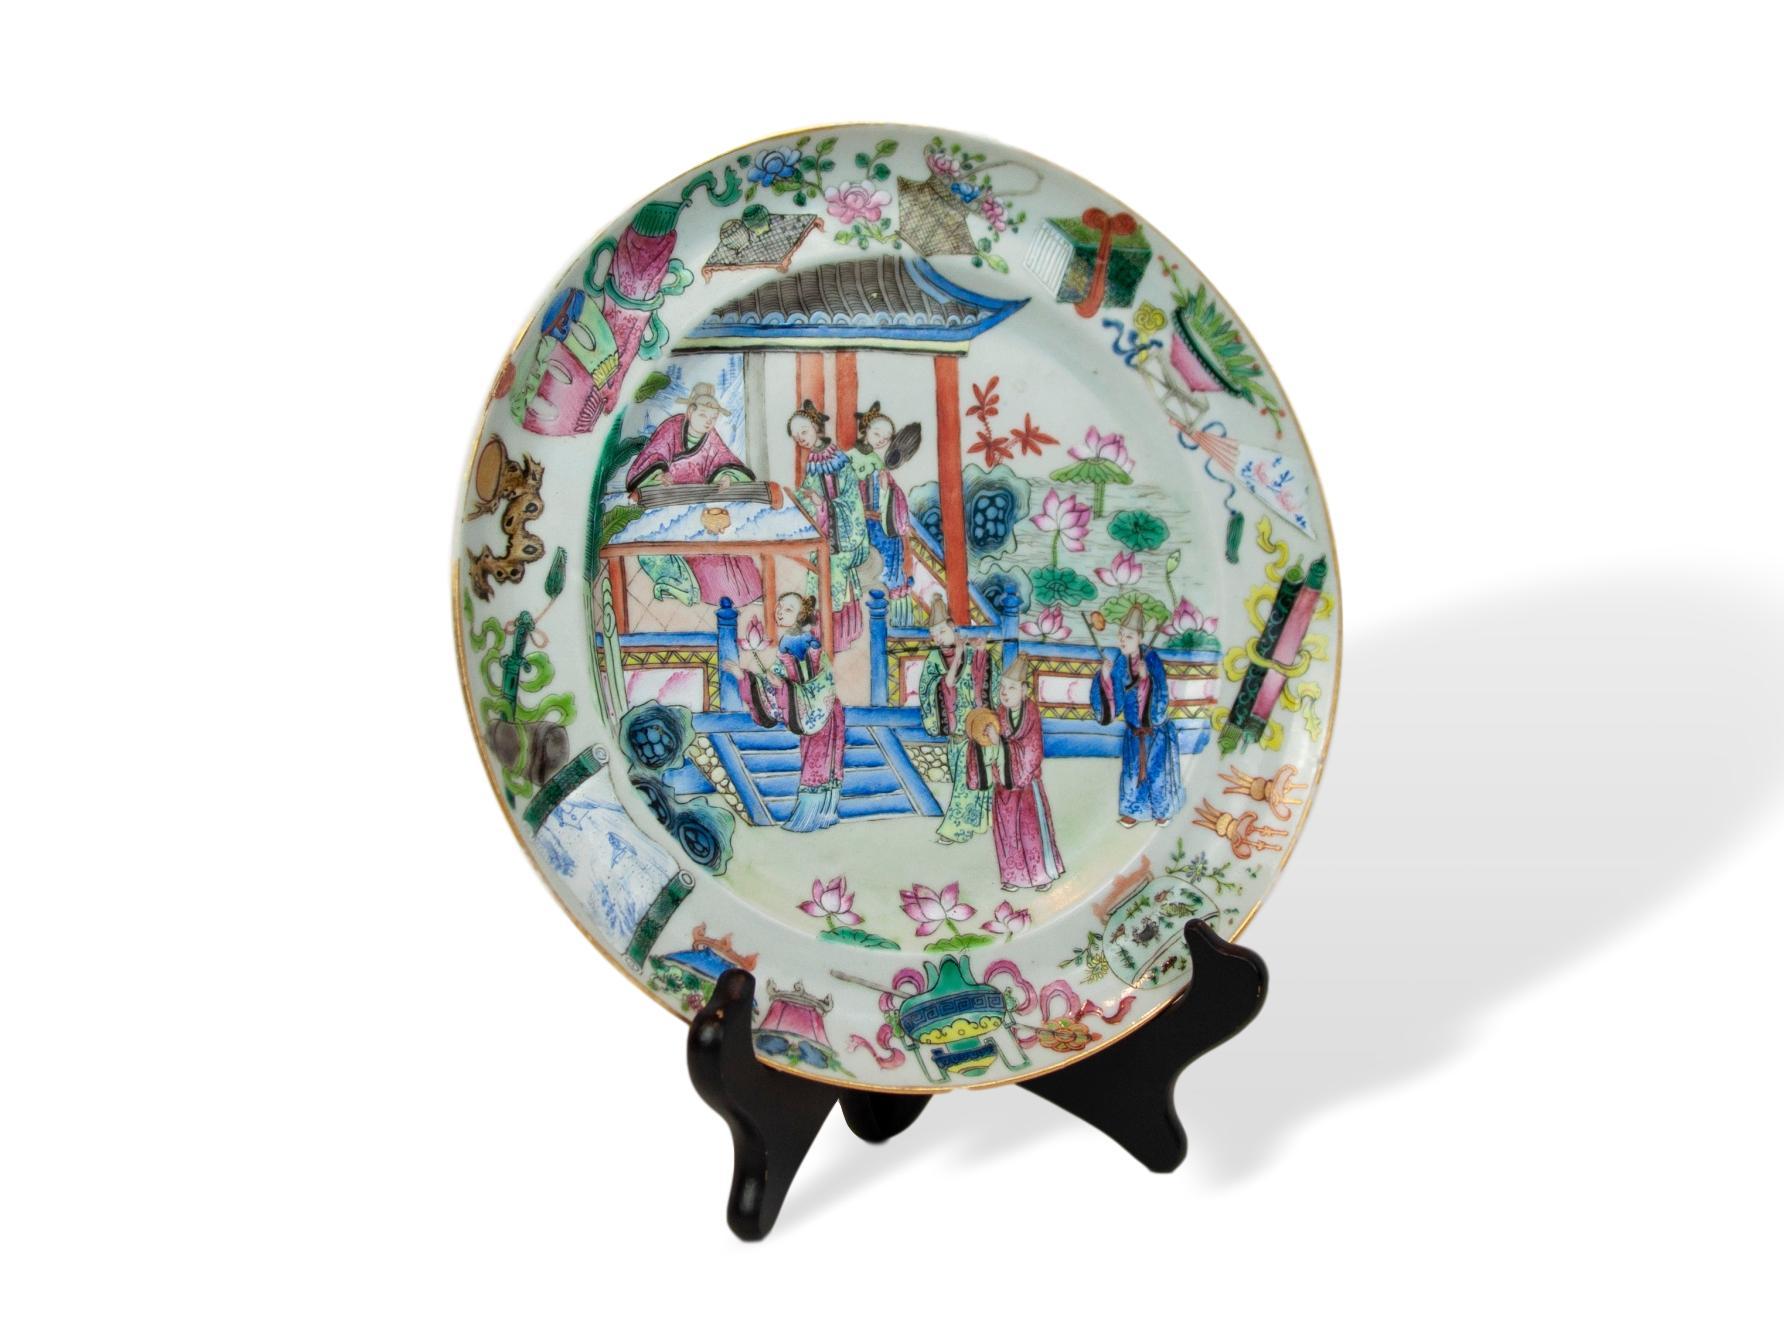 Canton Famille rose 9.6 inch plate, ca. 1840, enameled with seven figures, the four males forming a band, one playing the erhu, one playing symbols, one playing the dizi (bamboo flute), and the seated figure playing the guzheng (plucked zither),